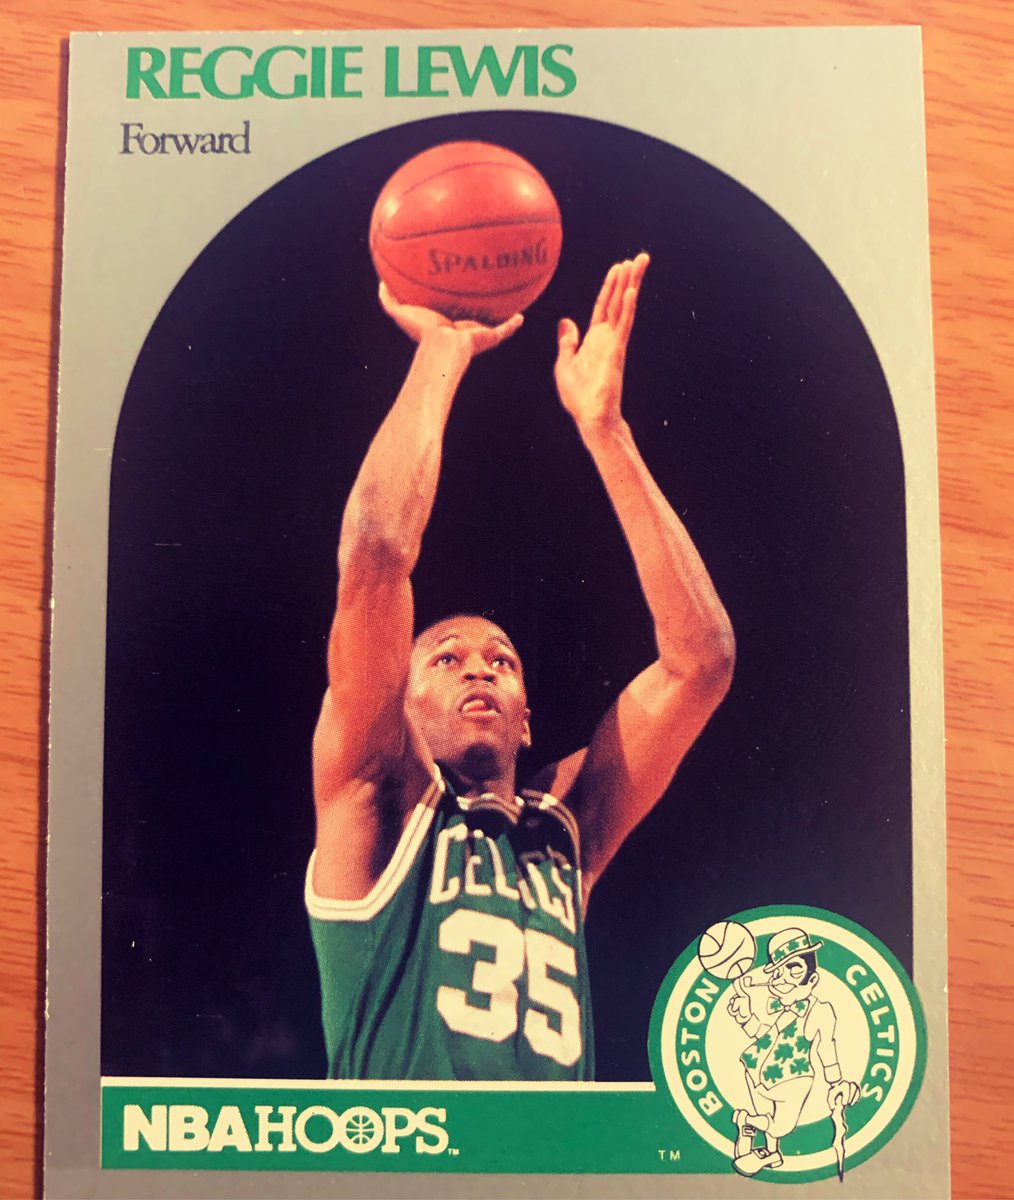 Our 2nd #playeroftheday is the late Reggie Lewis. Lewis was part of one of the greatest high school teams the #dunbarpoets. Playing with future pros Muggsy Bouges, David Wingate & Reggie Williams the Poets went 60-0 over Lewis’ Jr & Sr seasons.